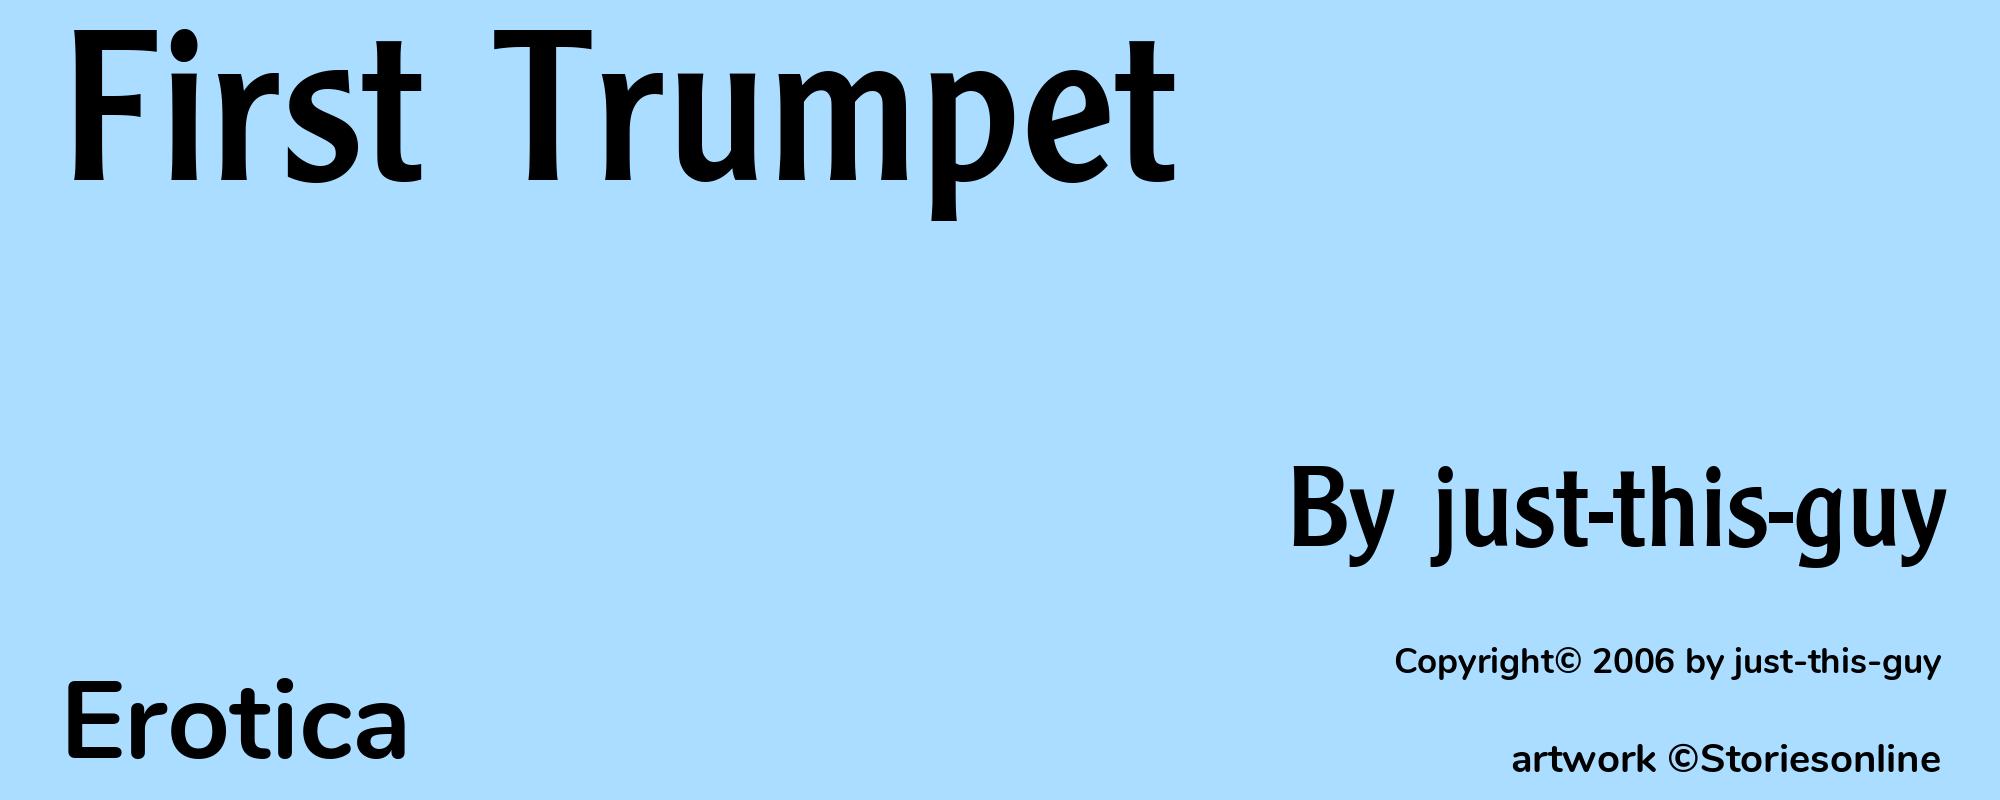 First Trumpet - Cover